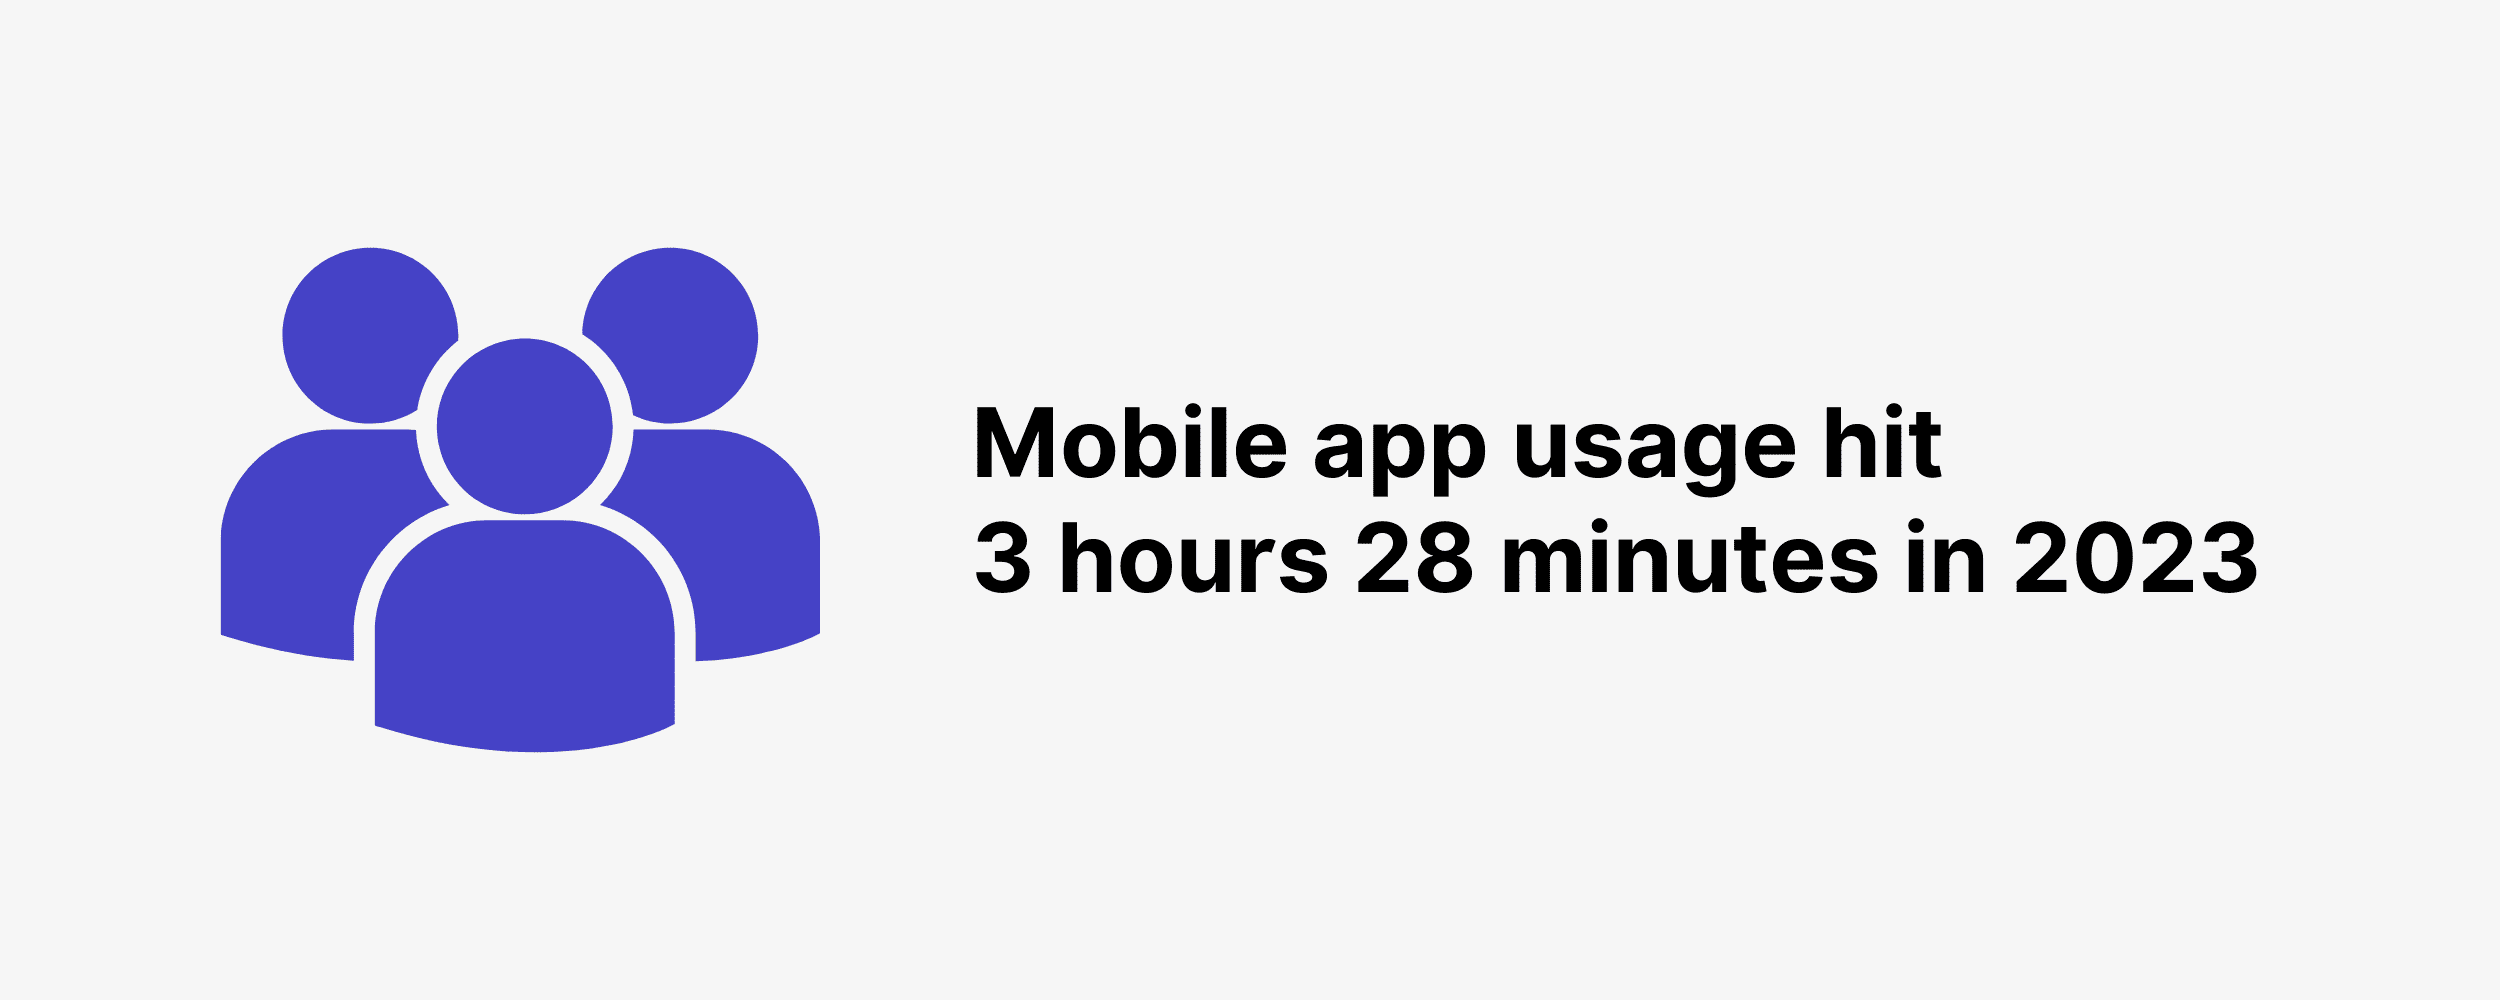 Mobile app usage hit 3 hours 28 minutes in 2023